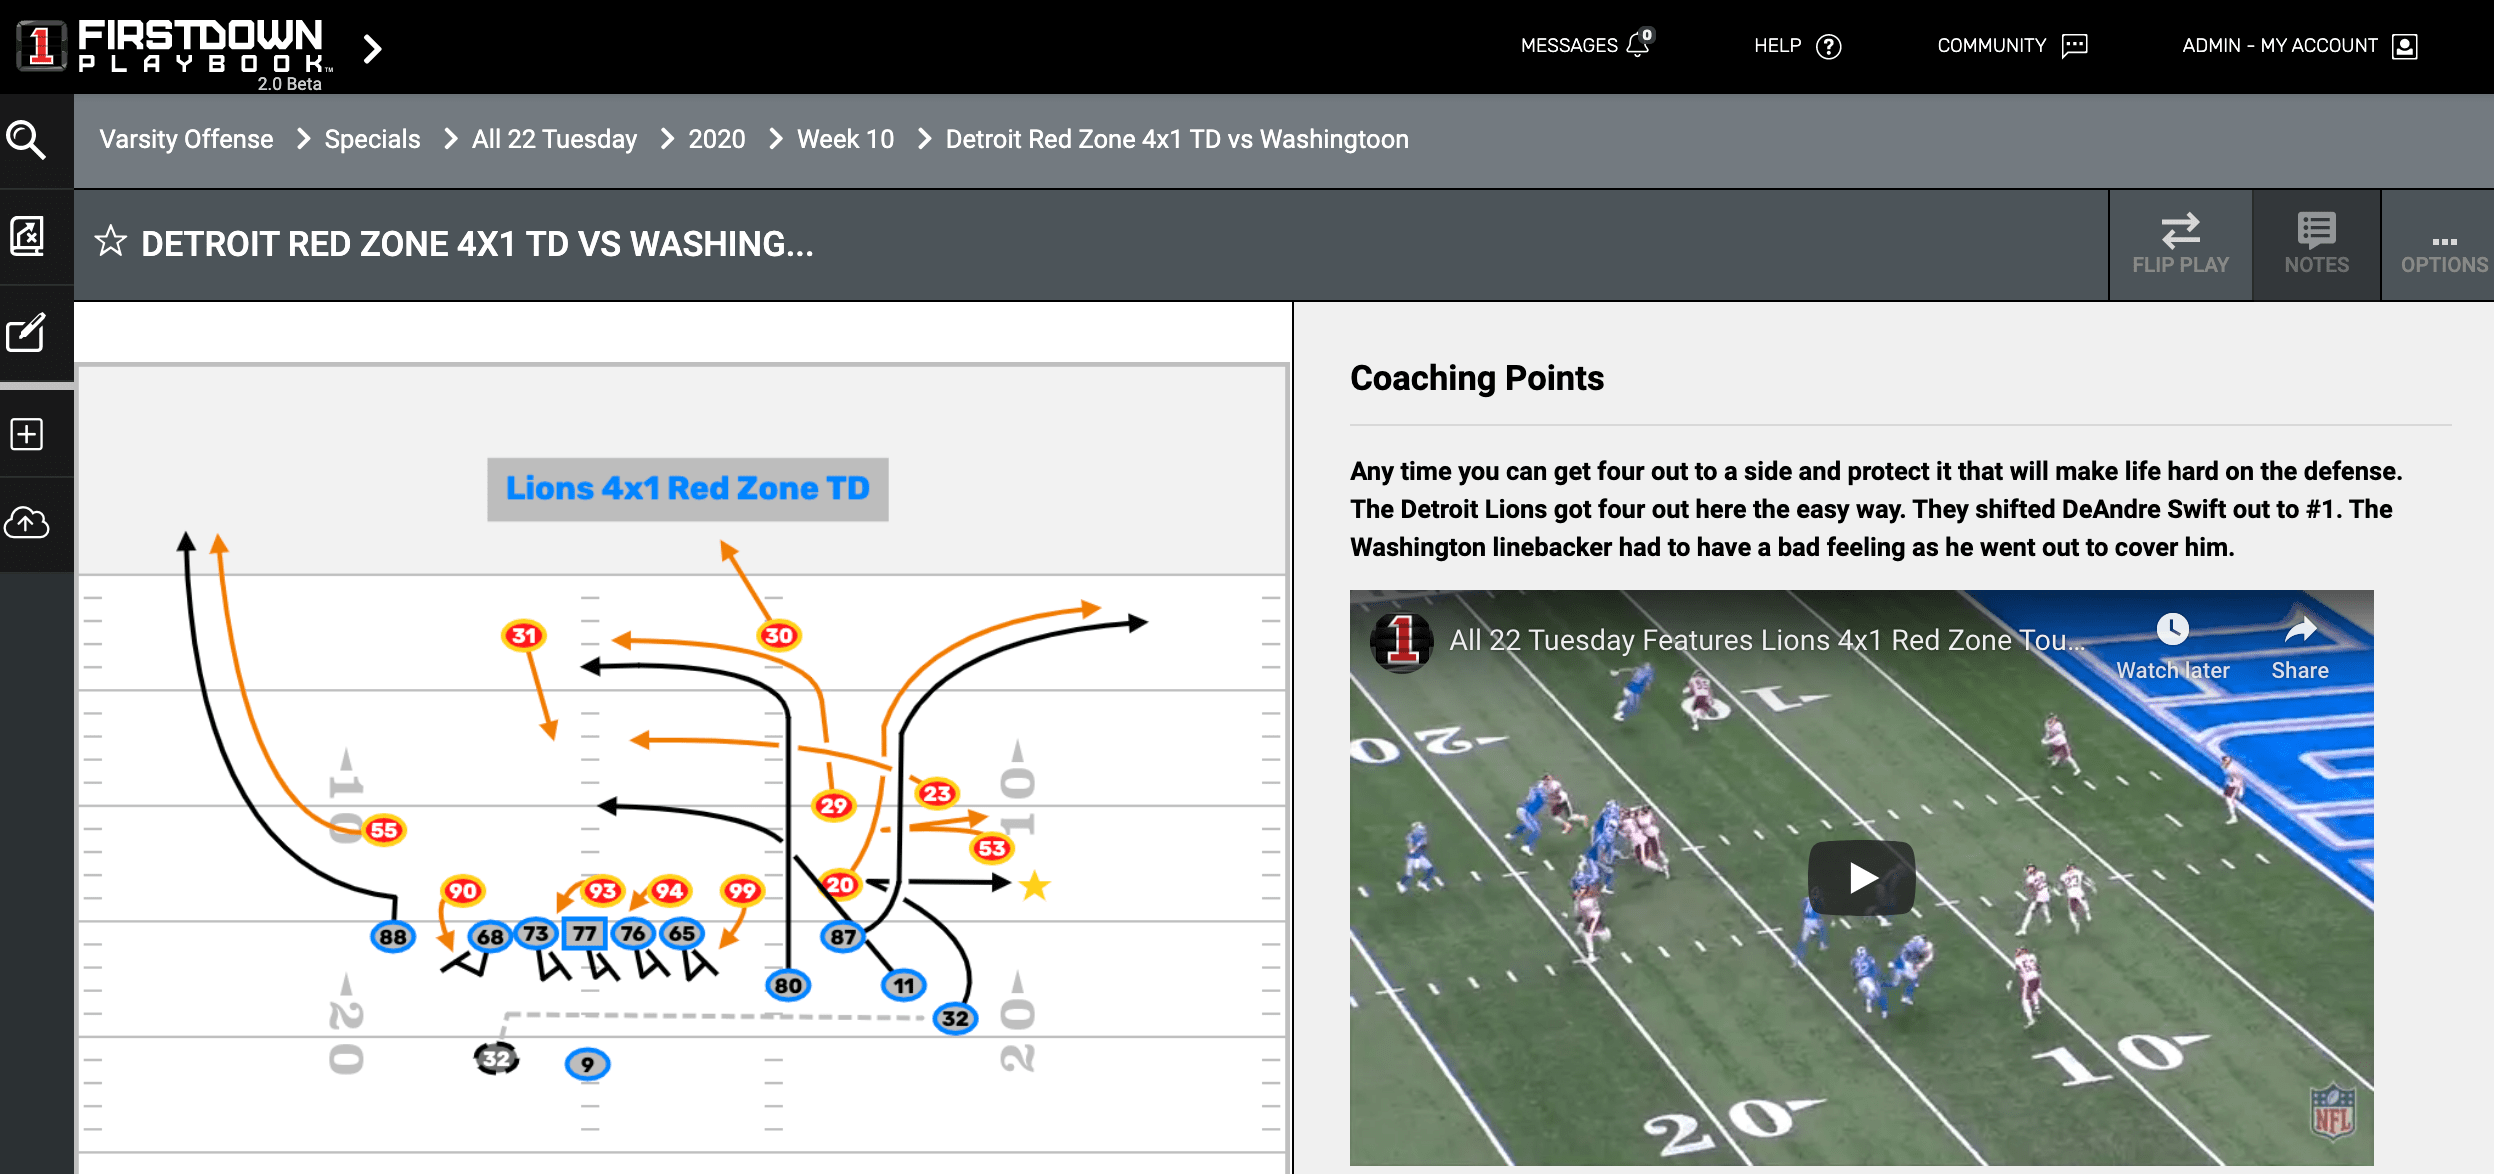 Red Zone TD Presents Matchup Problems